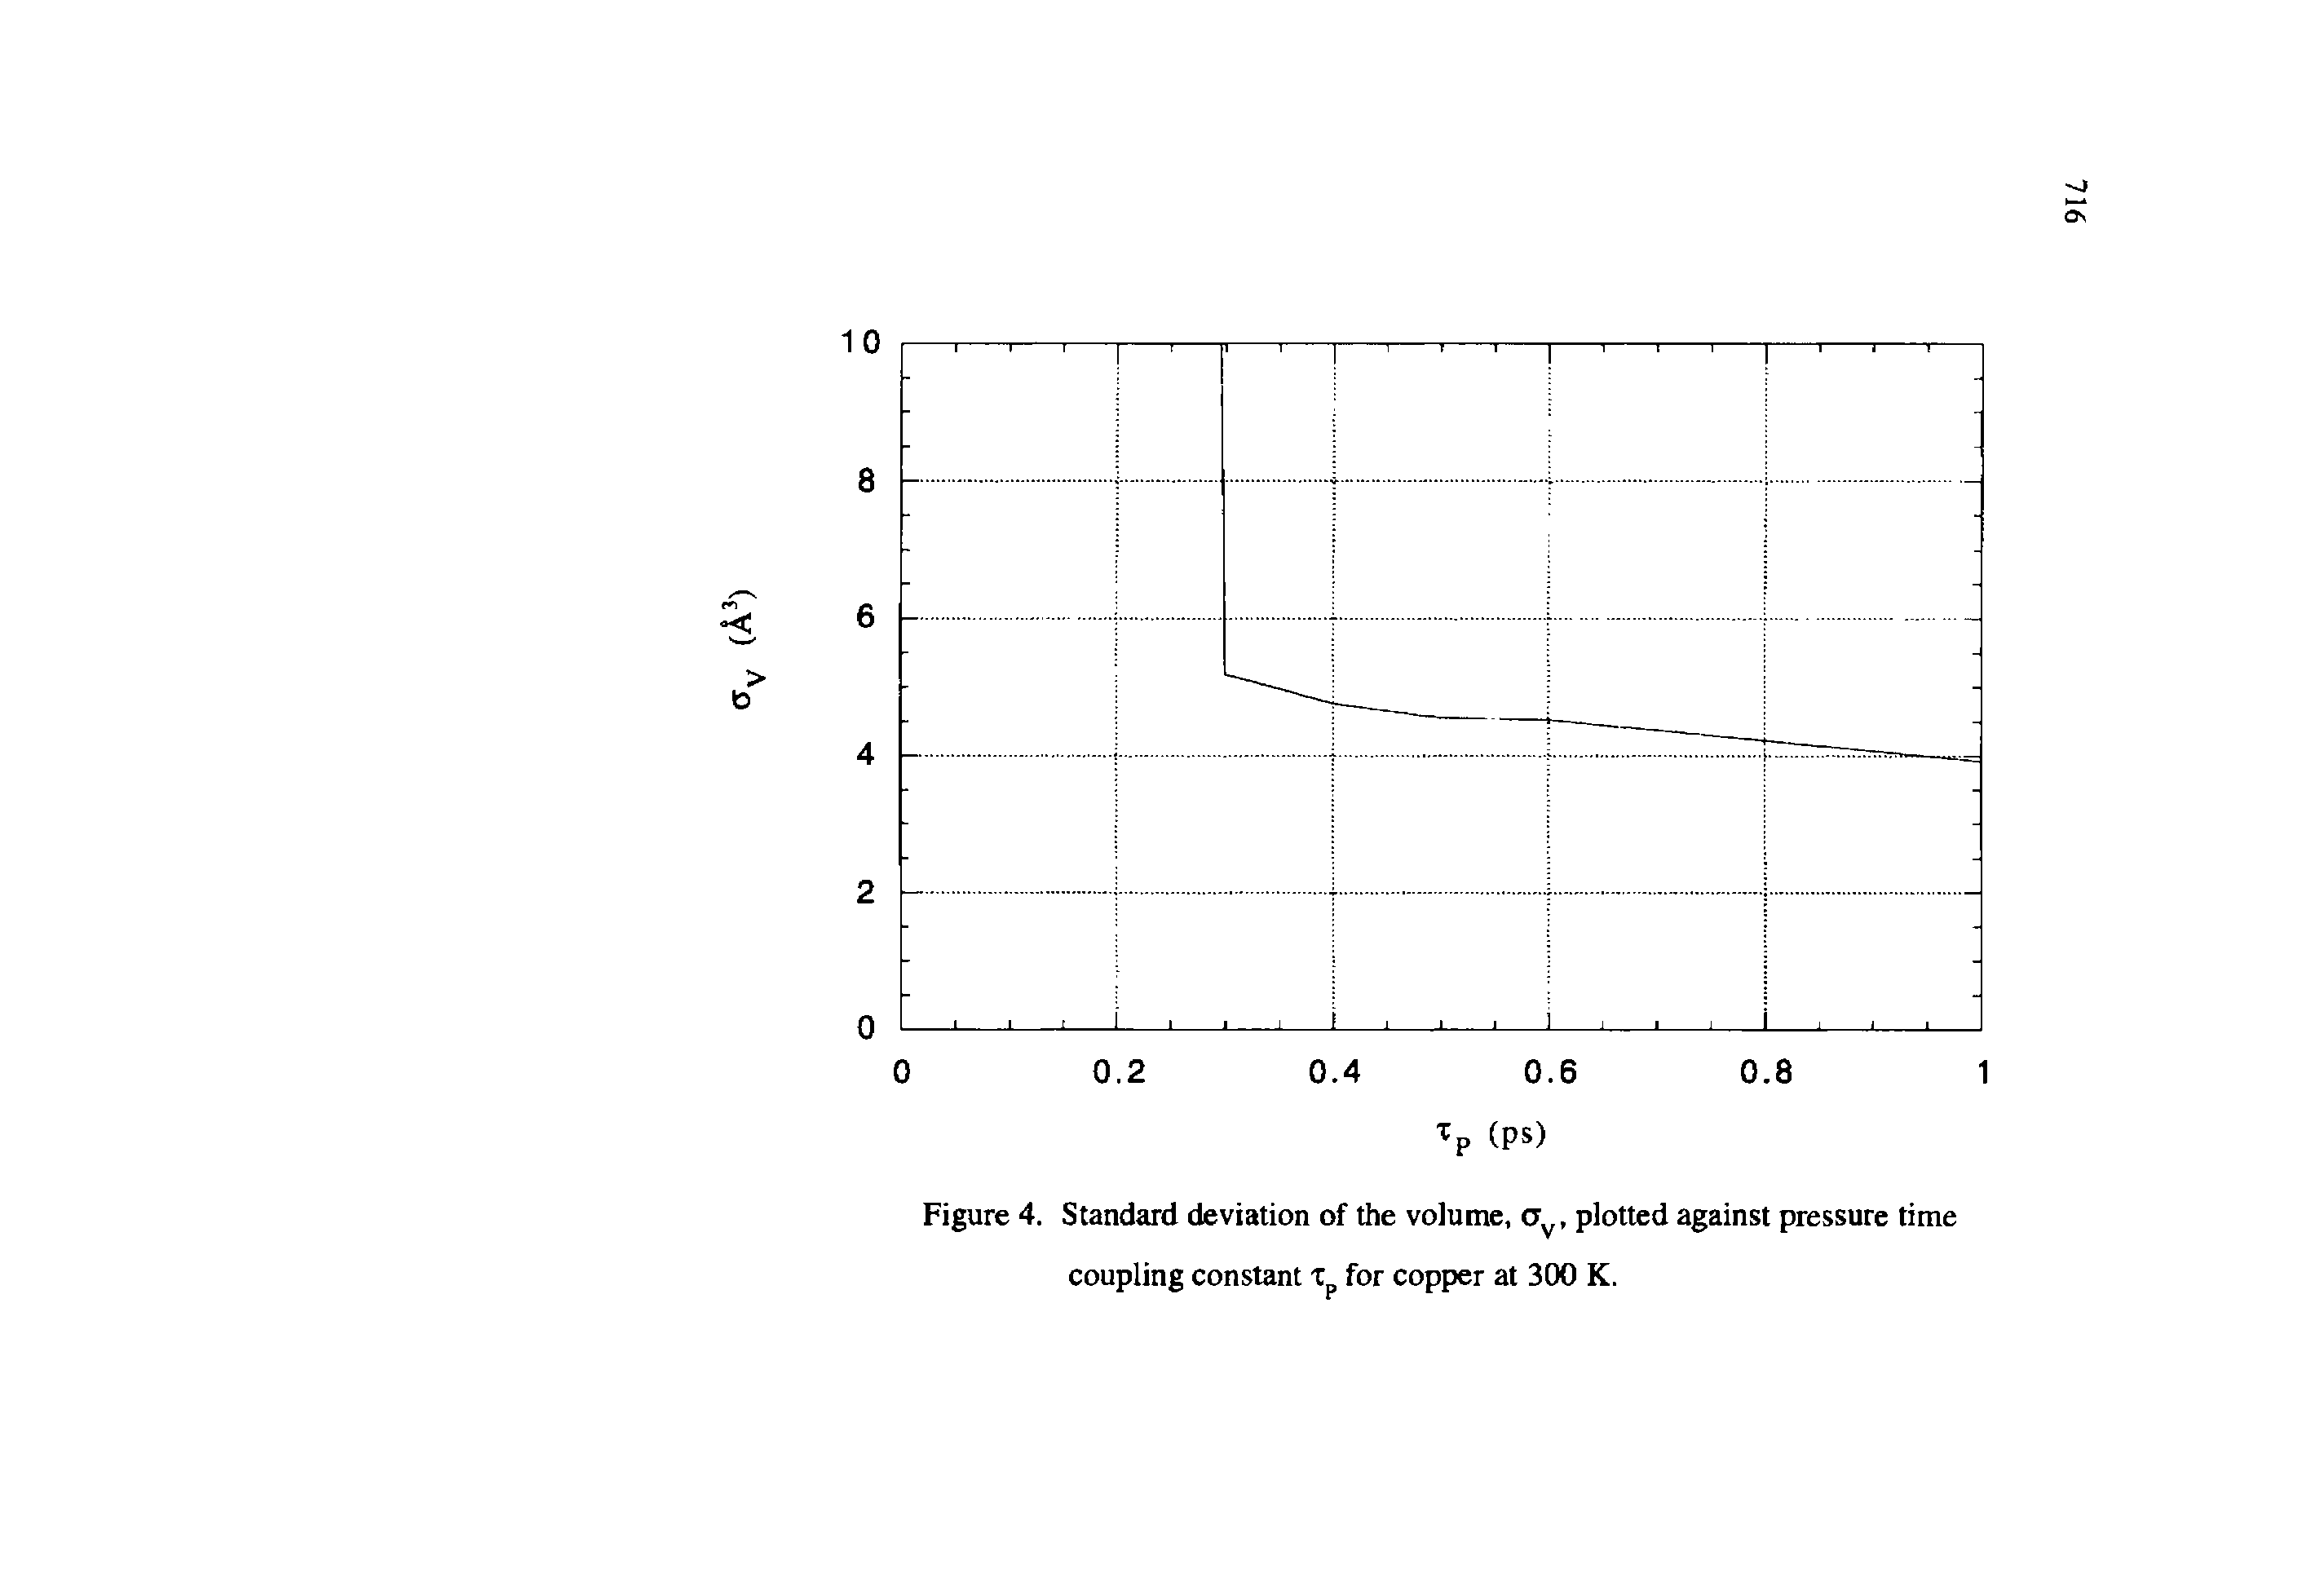 Figure 4. Standard deviation of the volume, plotted against pressure time coupling constant Xp for copper at 300 K.